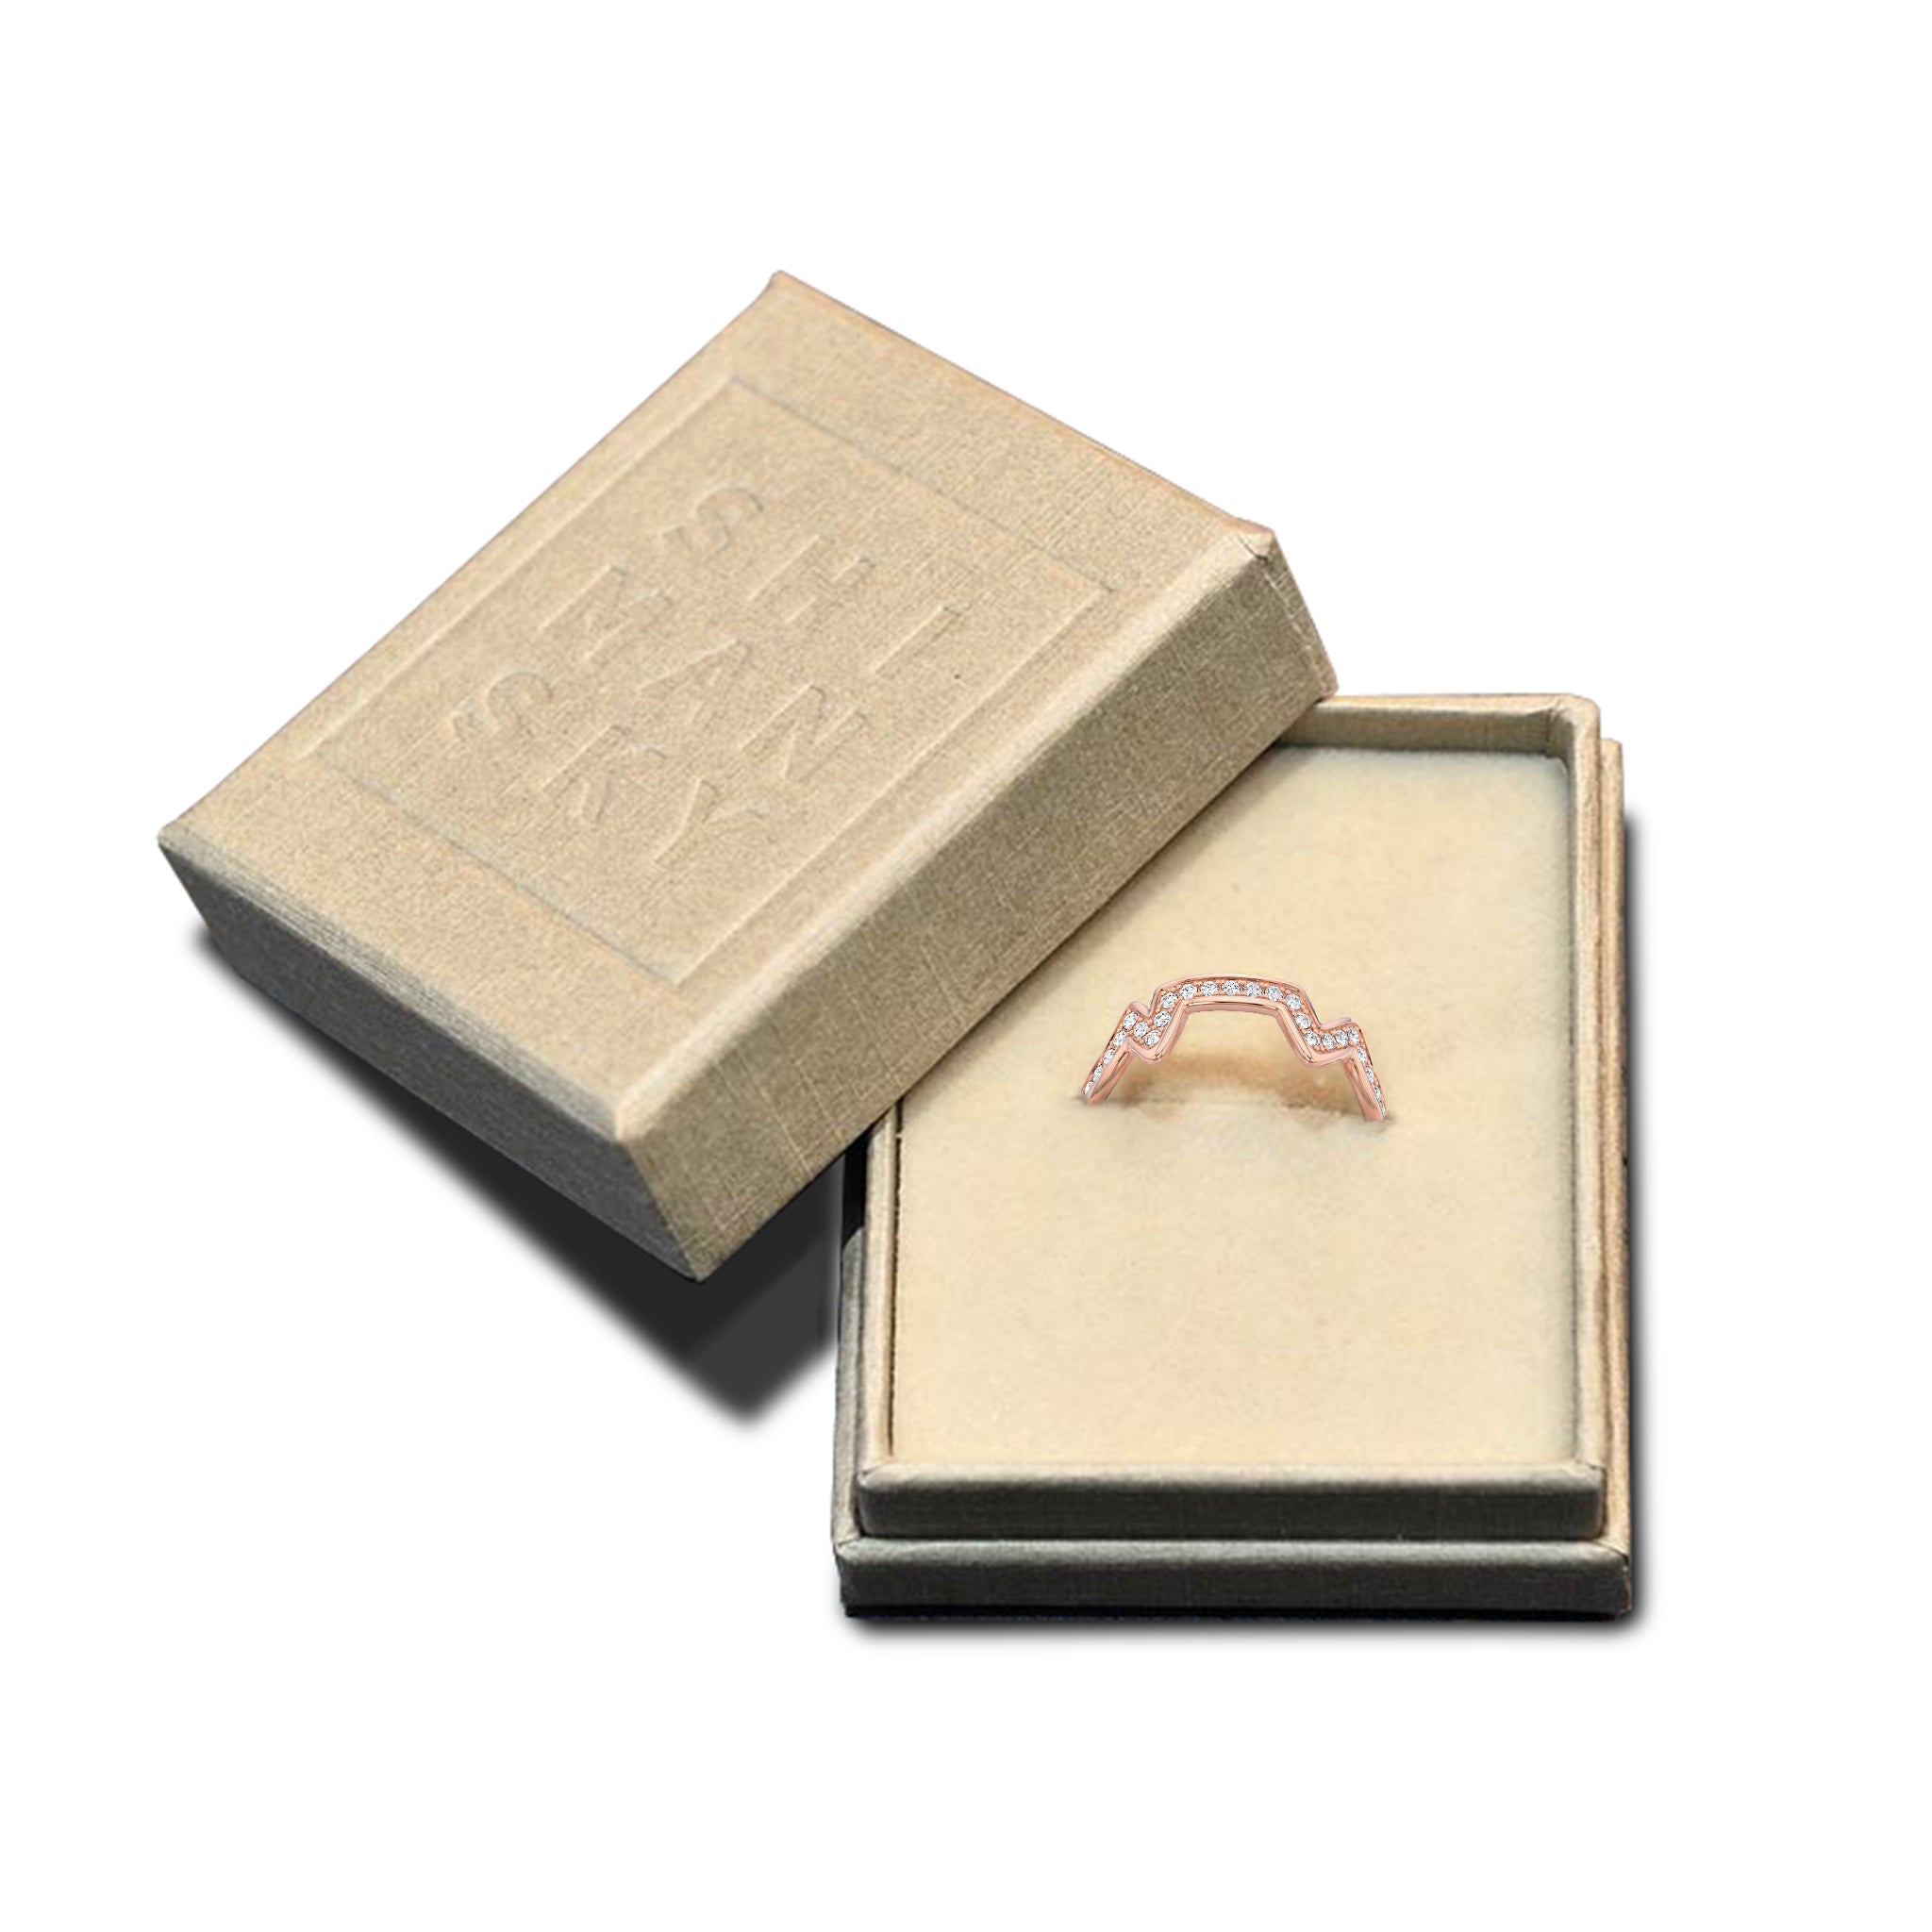 Shimansky - Table Mountain Pave Diamond Ring Crafted in 14K Rose Gold